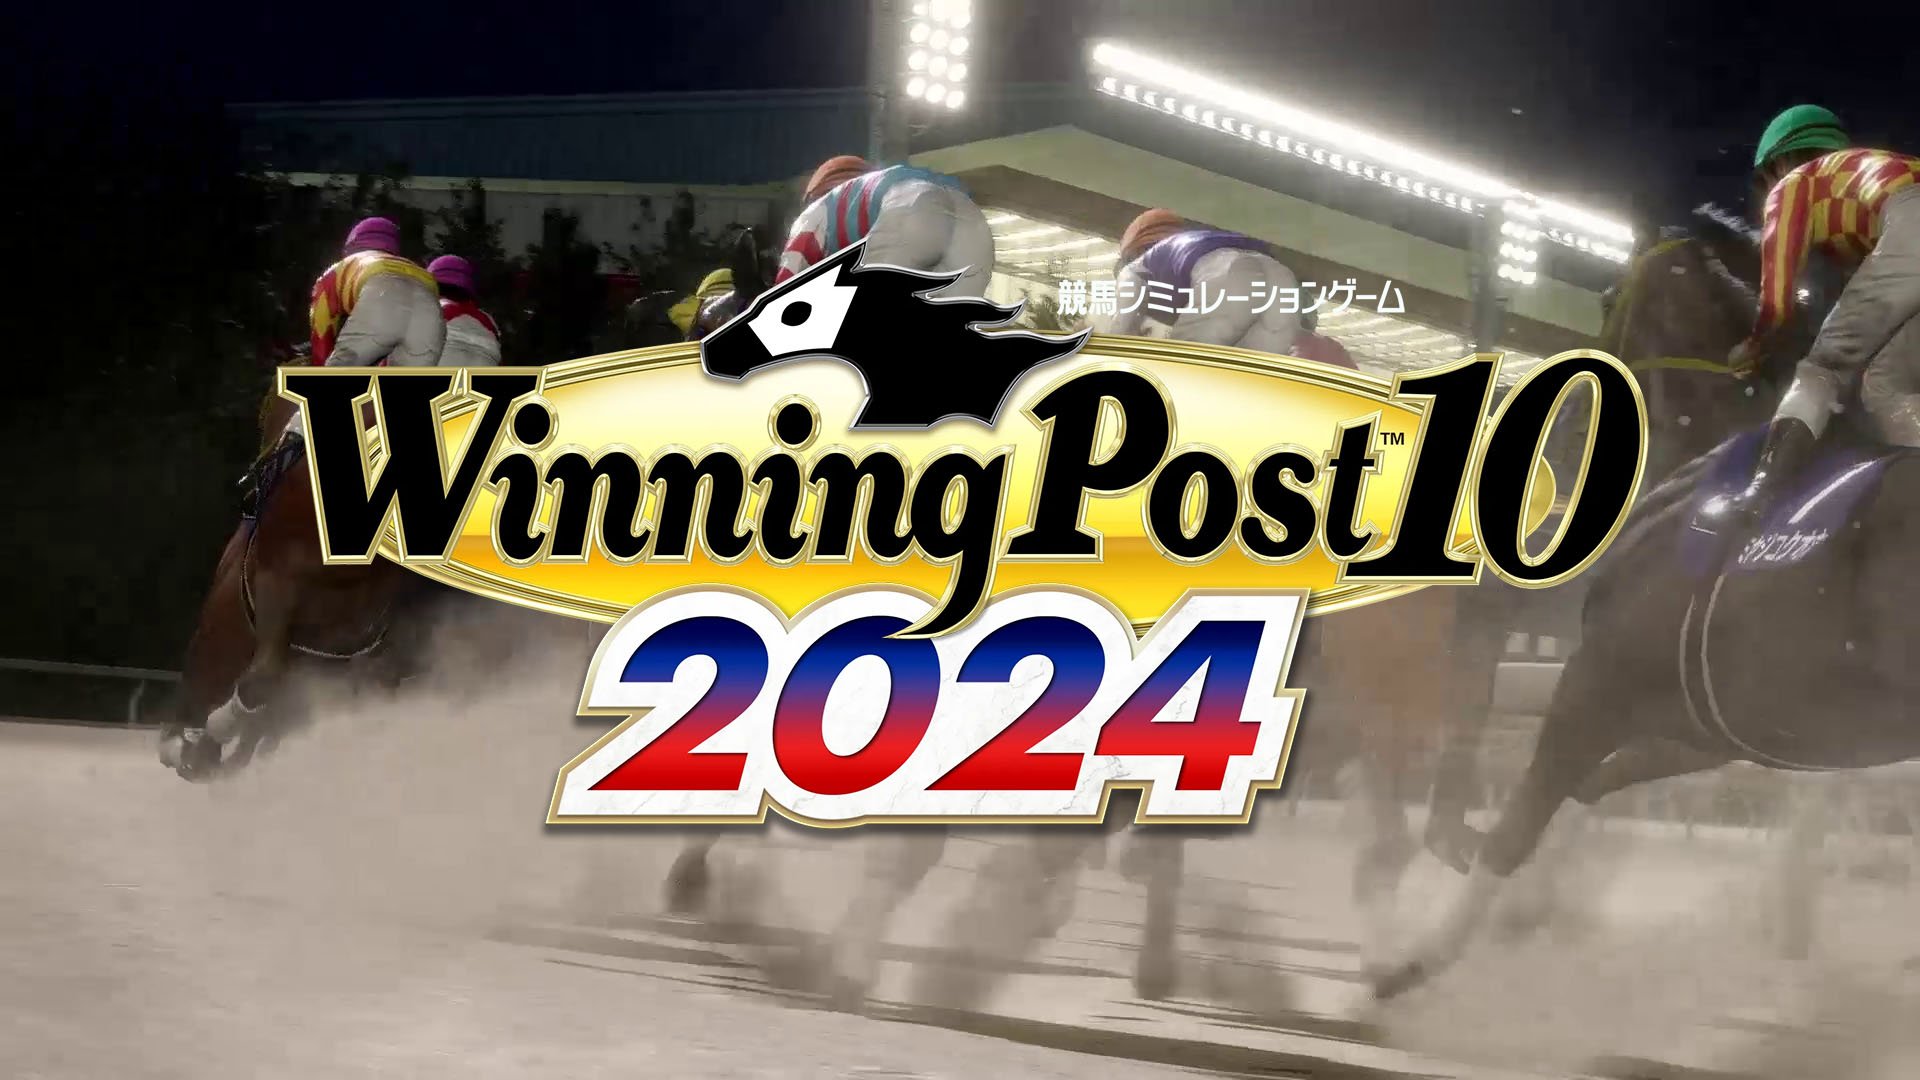 #
      Winning Post 10 2024 announced for PS5, PS4, Switch, and PC